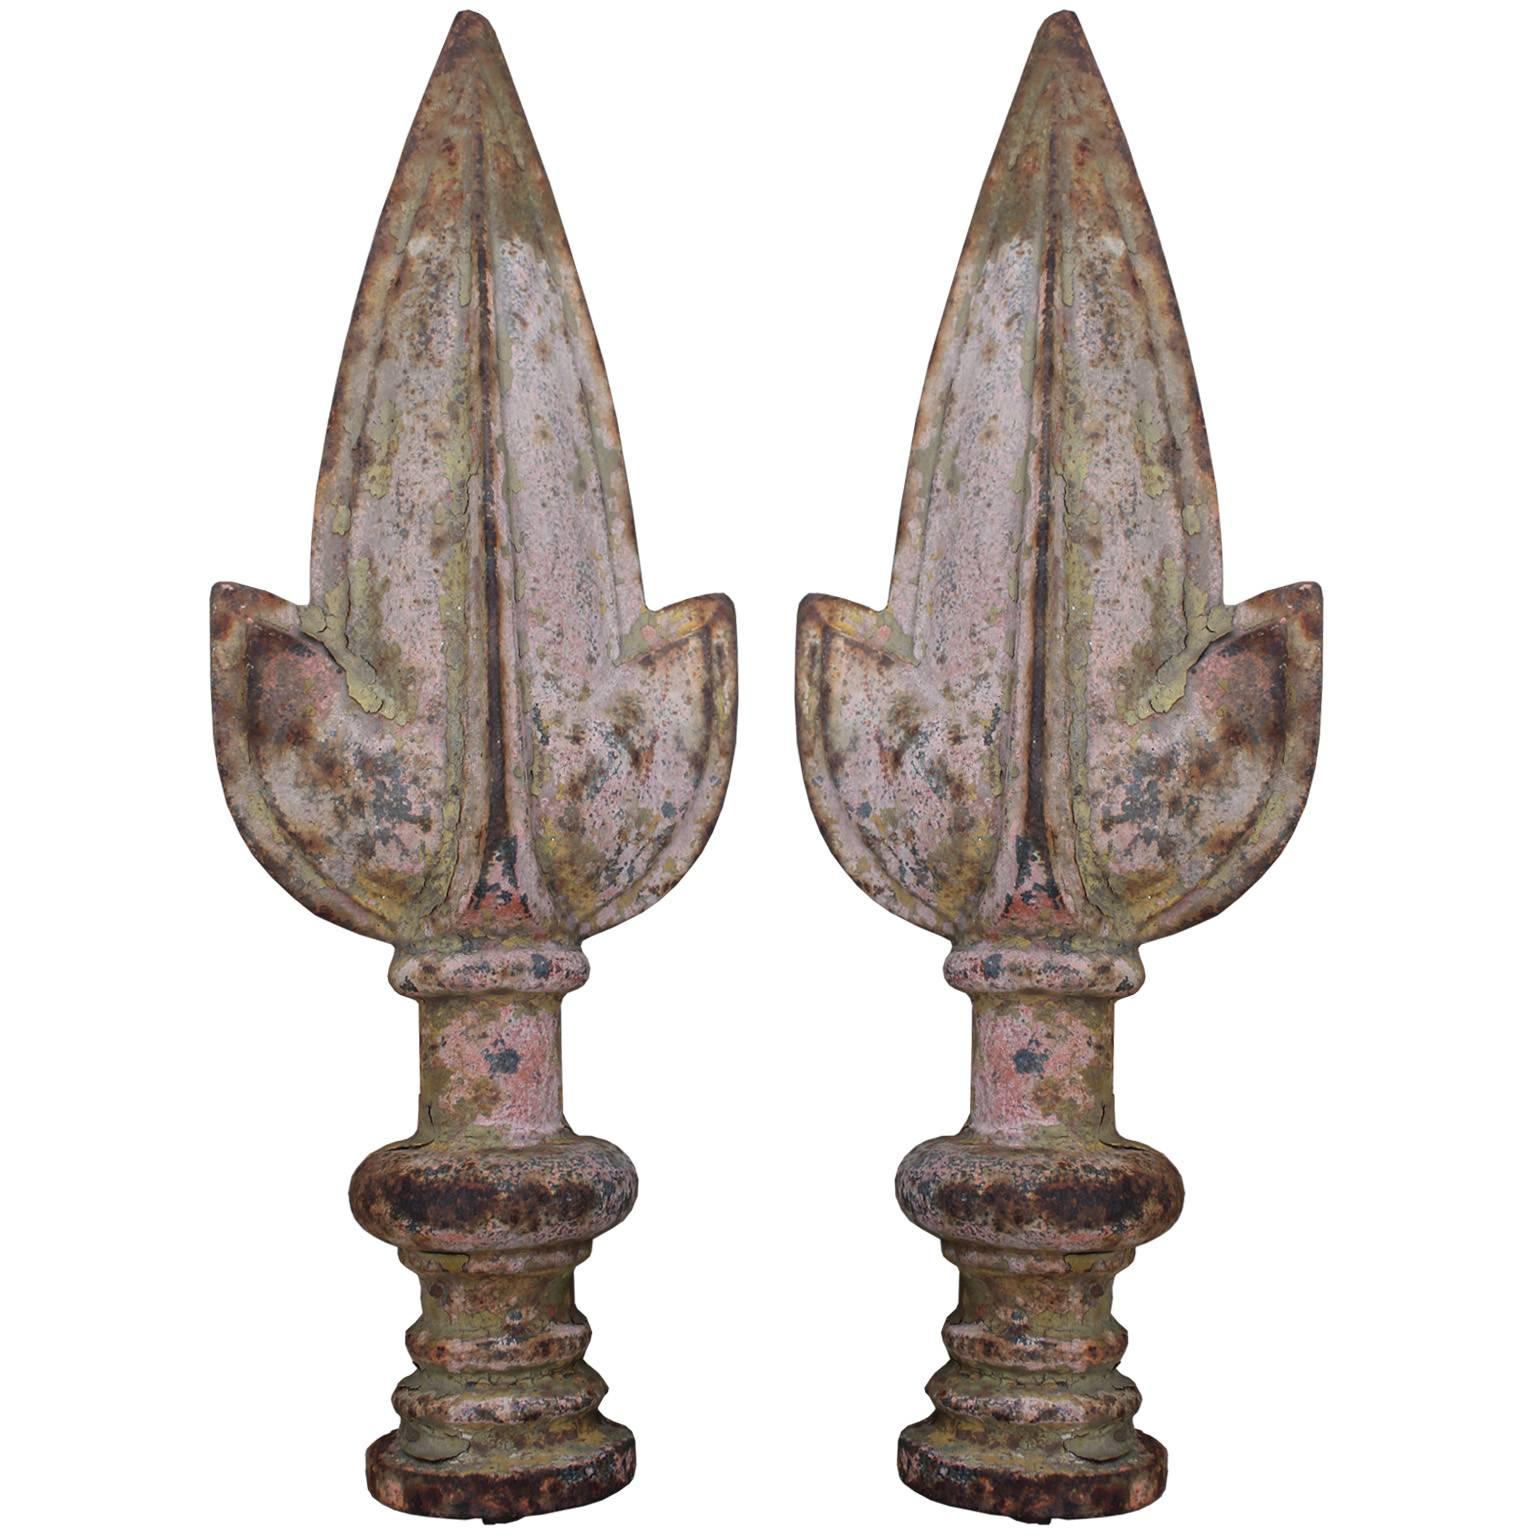 19th Century Antique Pair of Weathered French Large Finials